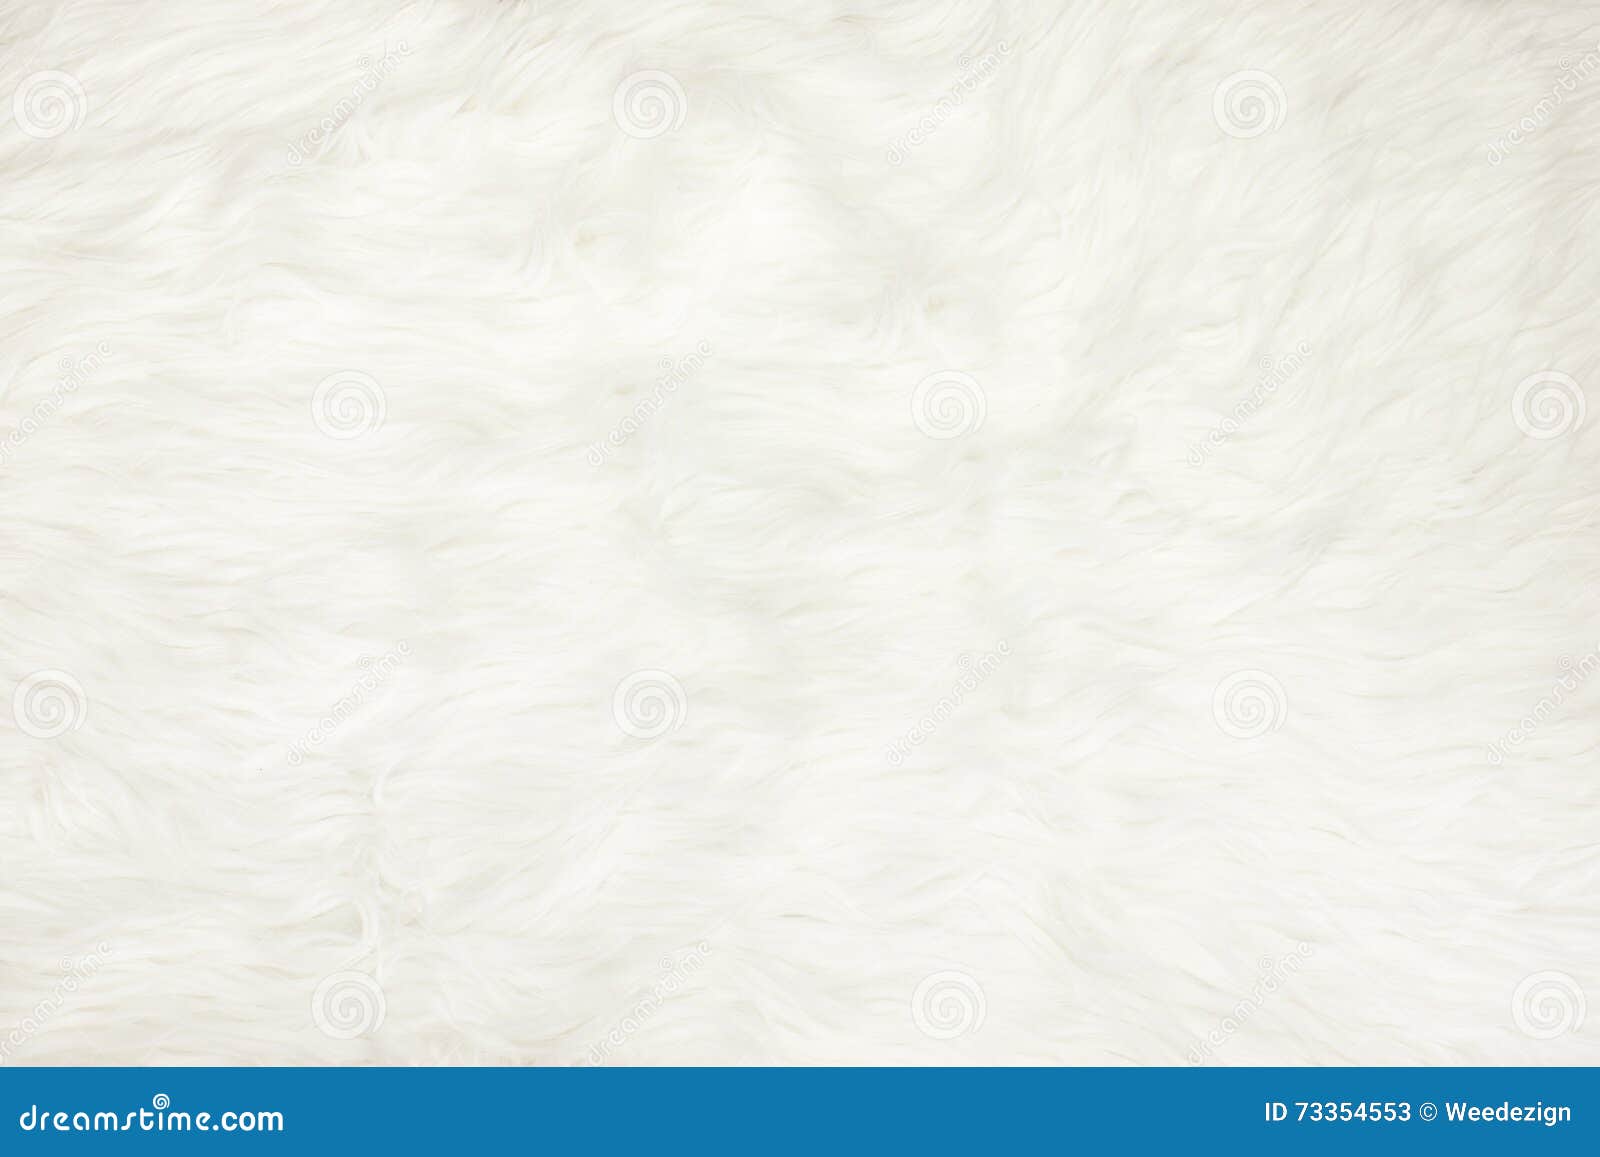 White Fur Background Stock Photo, Picture and Royalty Free Image. Image  83406200.